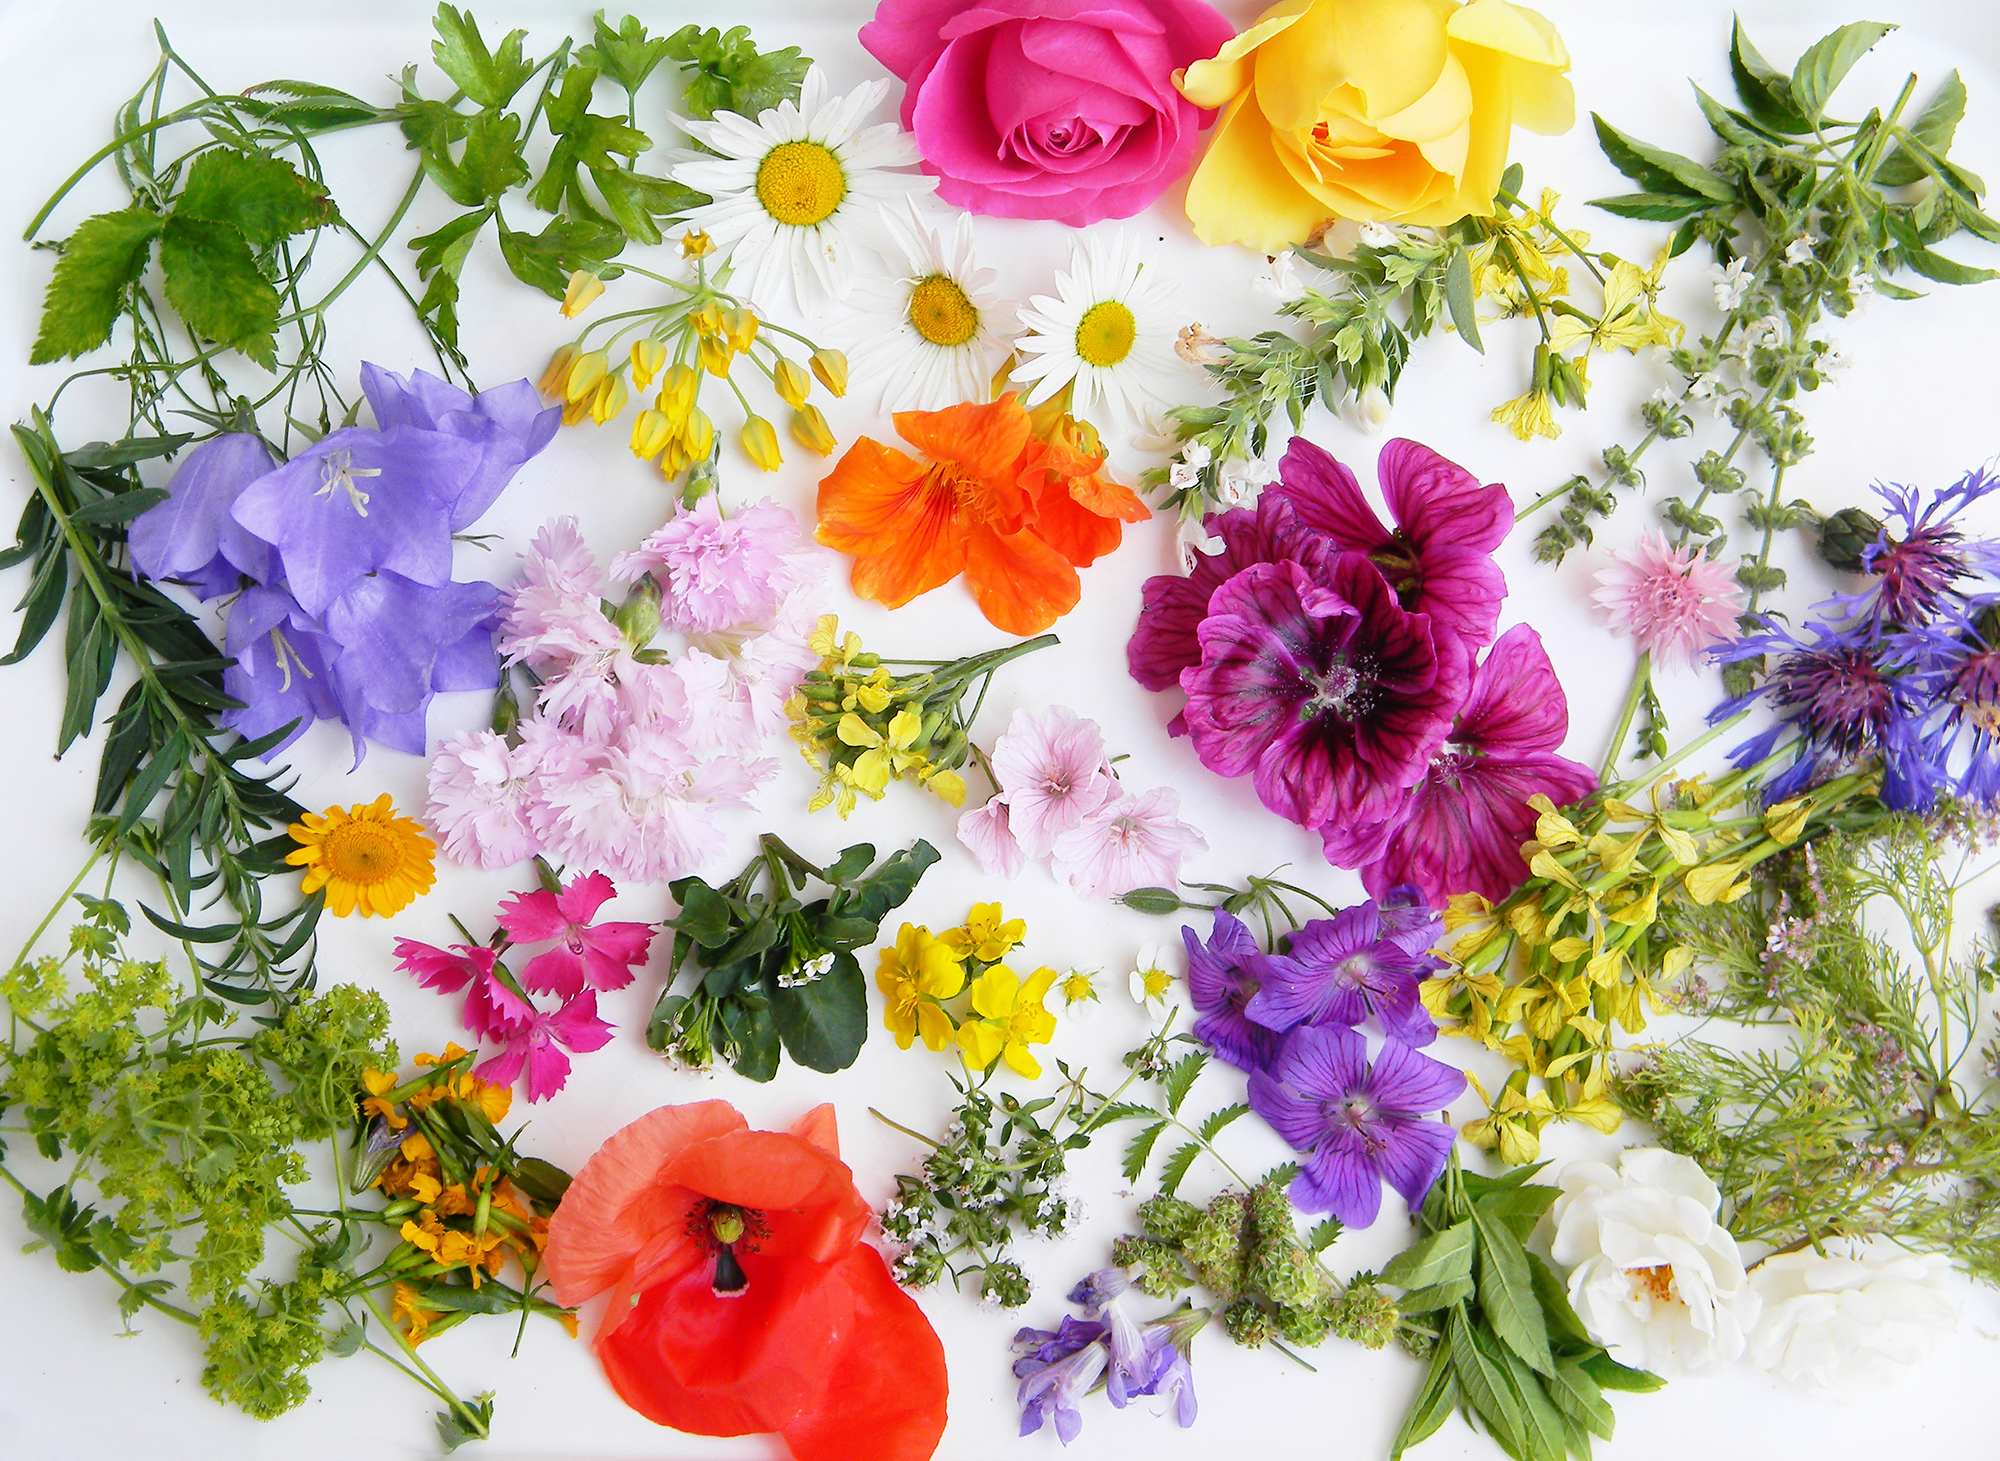 A list of edible flowers